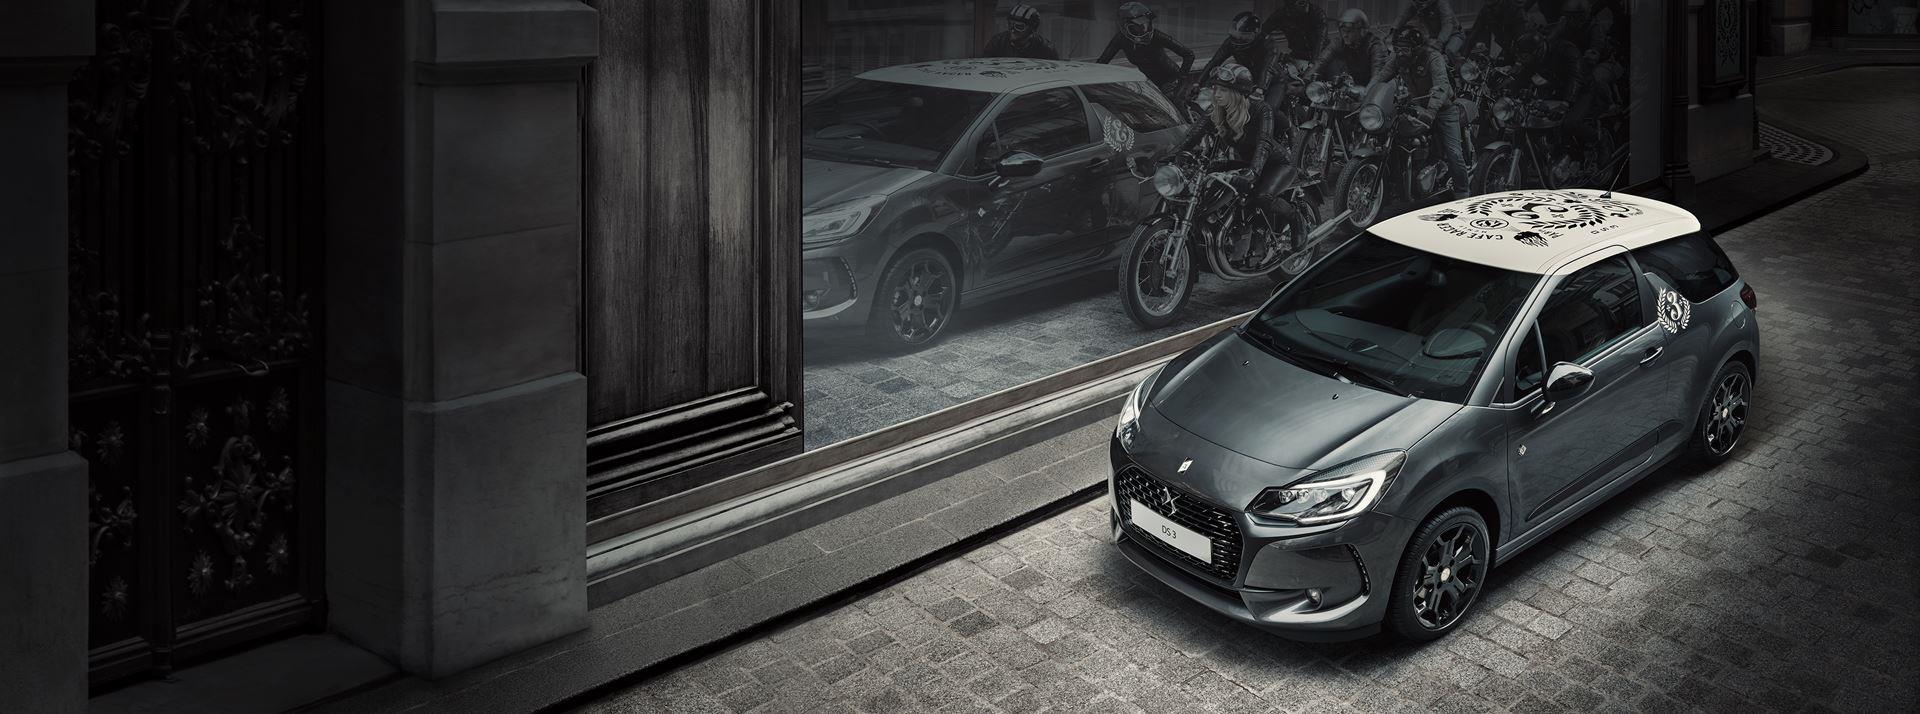 2018 DS 3 Cafe Racer Limited Edition